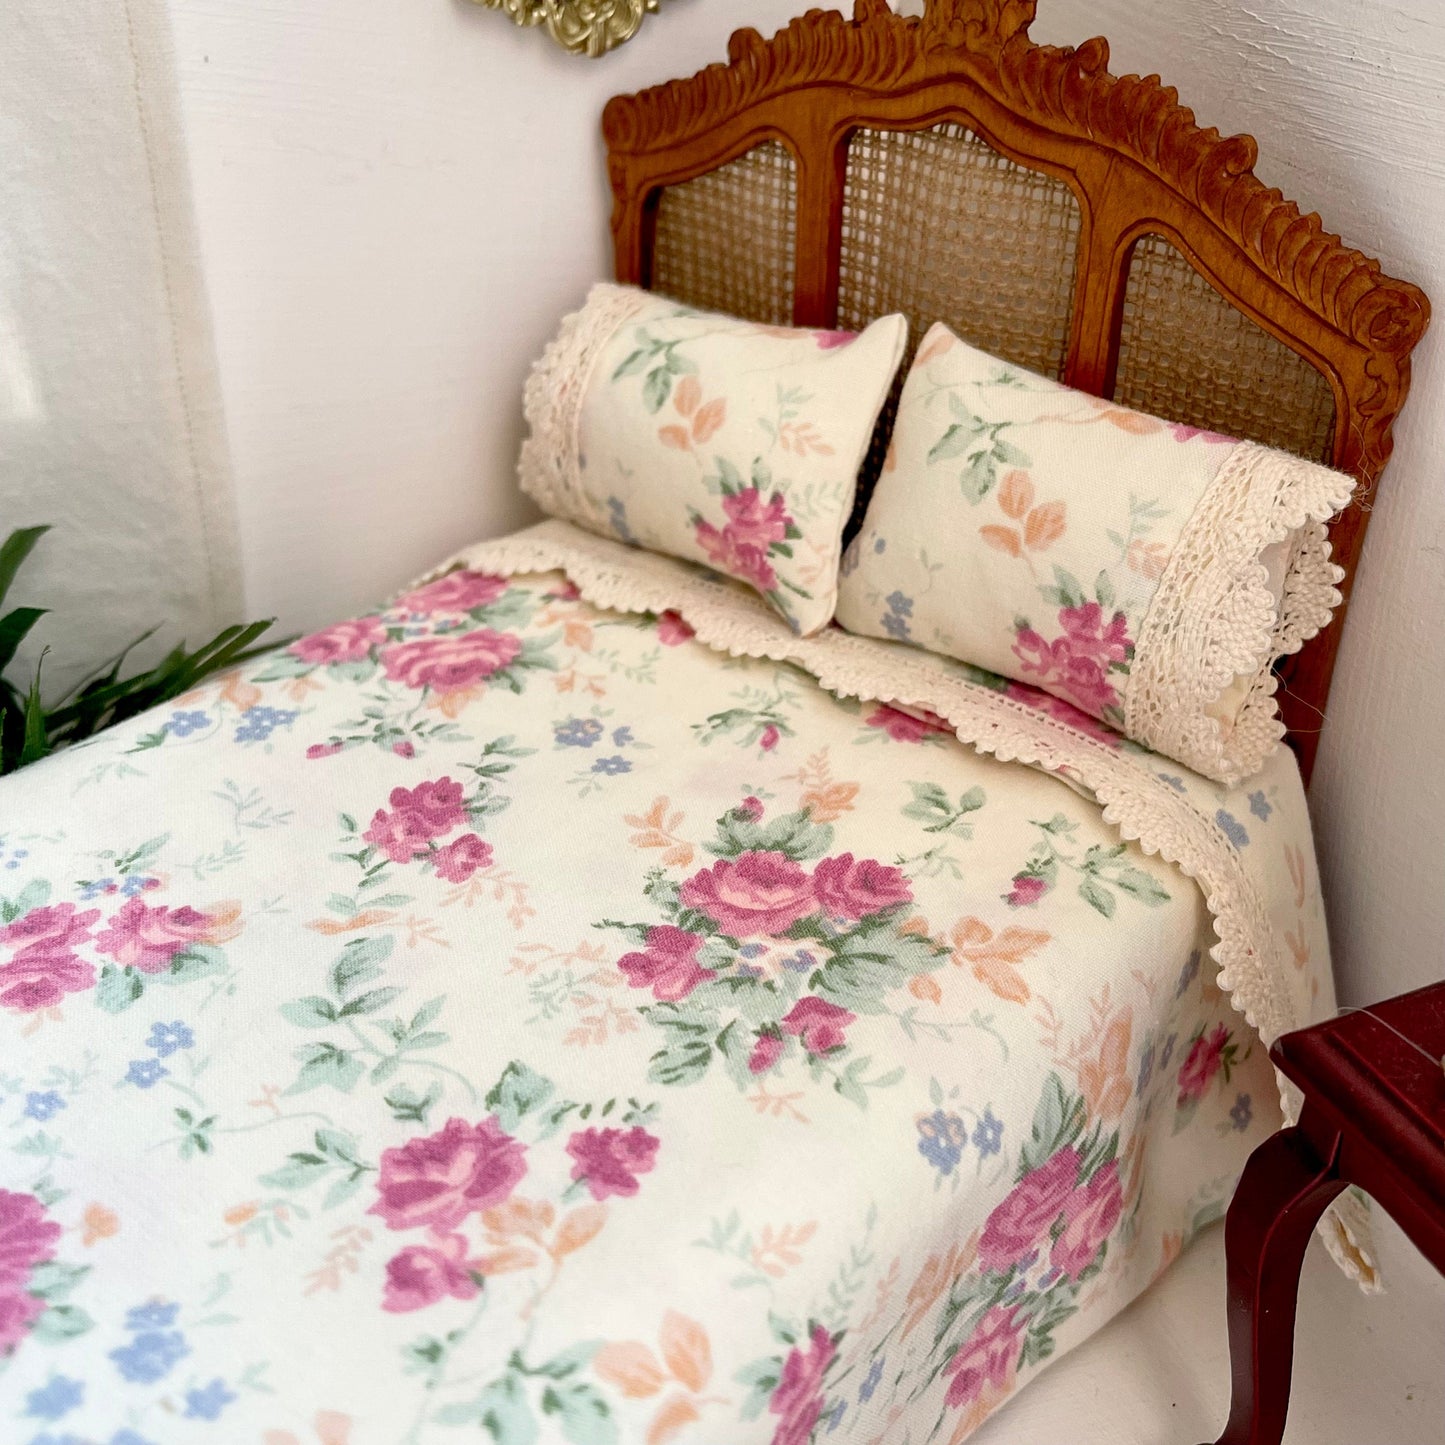 Chantallena Dollhouse Accessories Country Weekend | Pale Yellow and Red Roses Cotton Bedding Set 1:12 Scale | Kaylyn